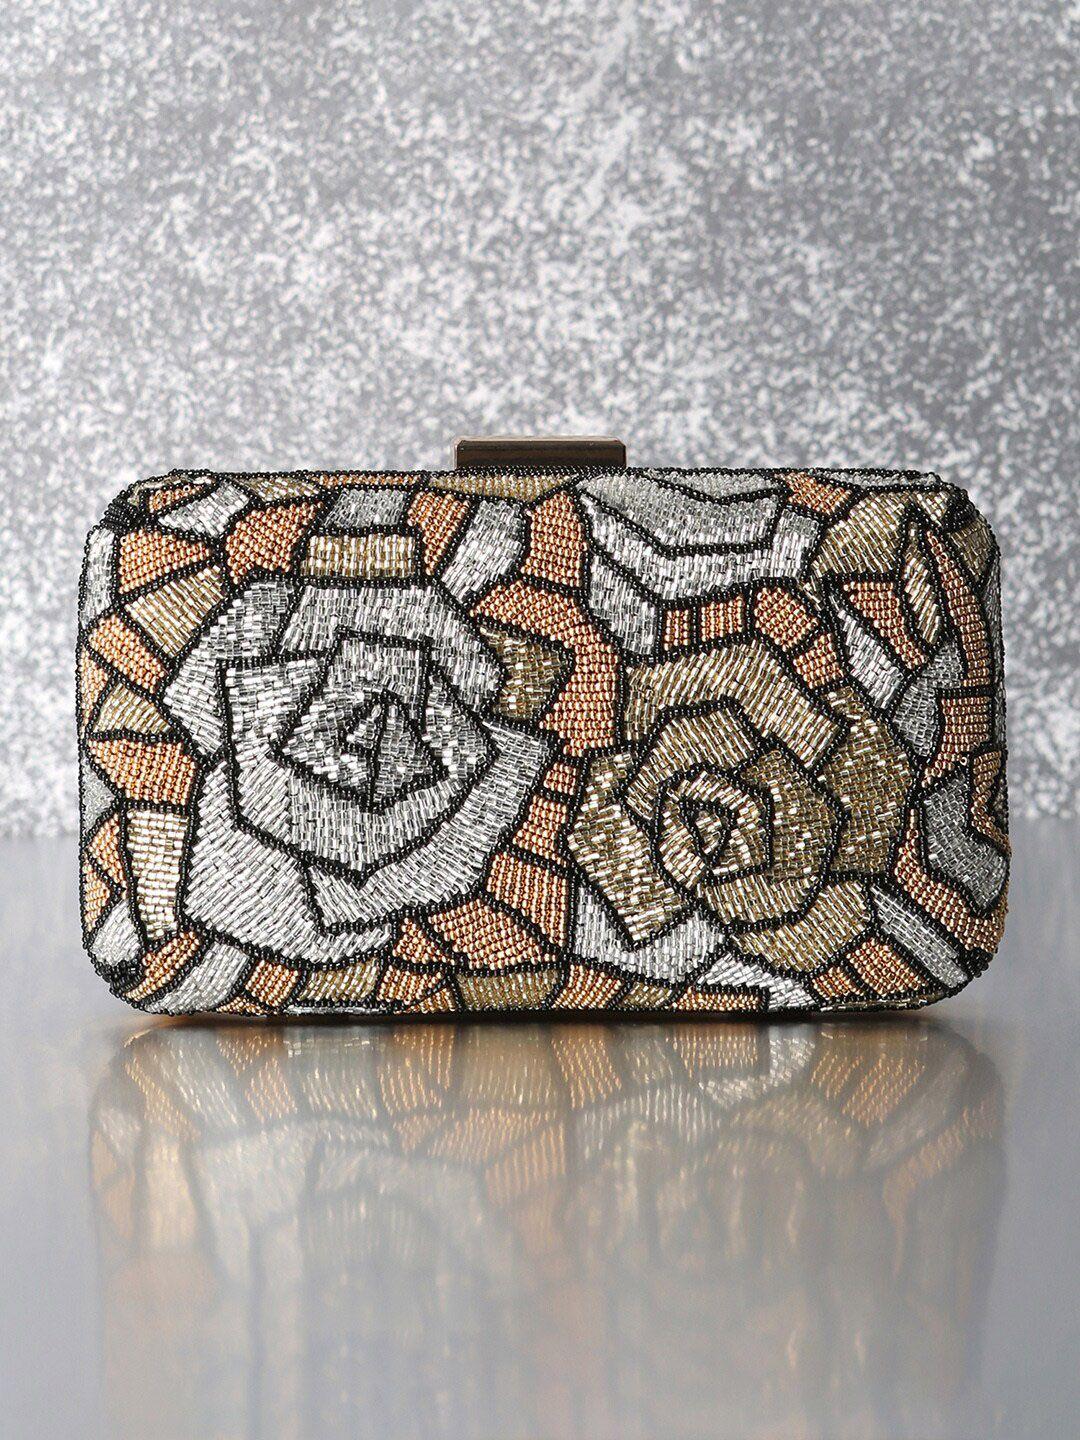 peora women silver-toned & gold-toned embellished purse clutch